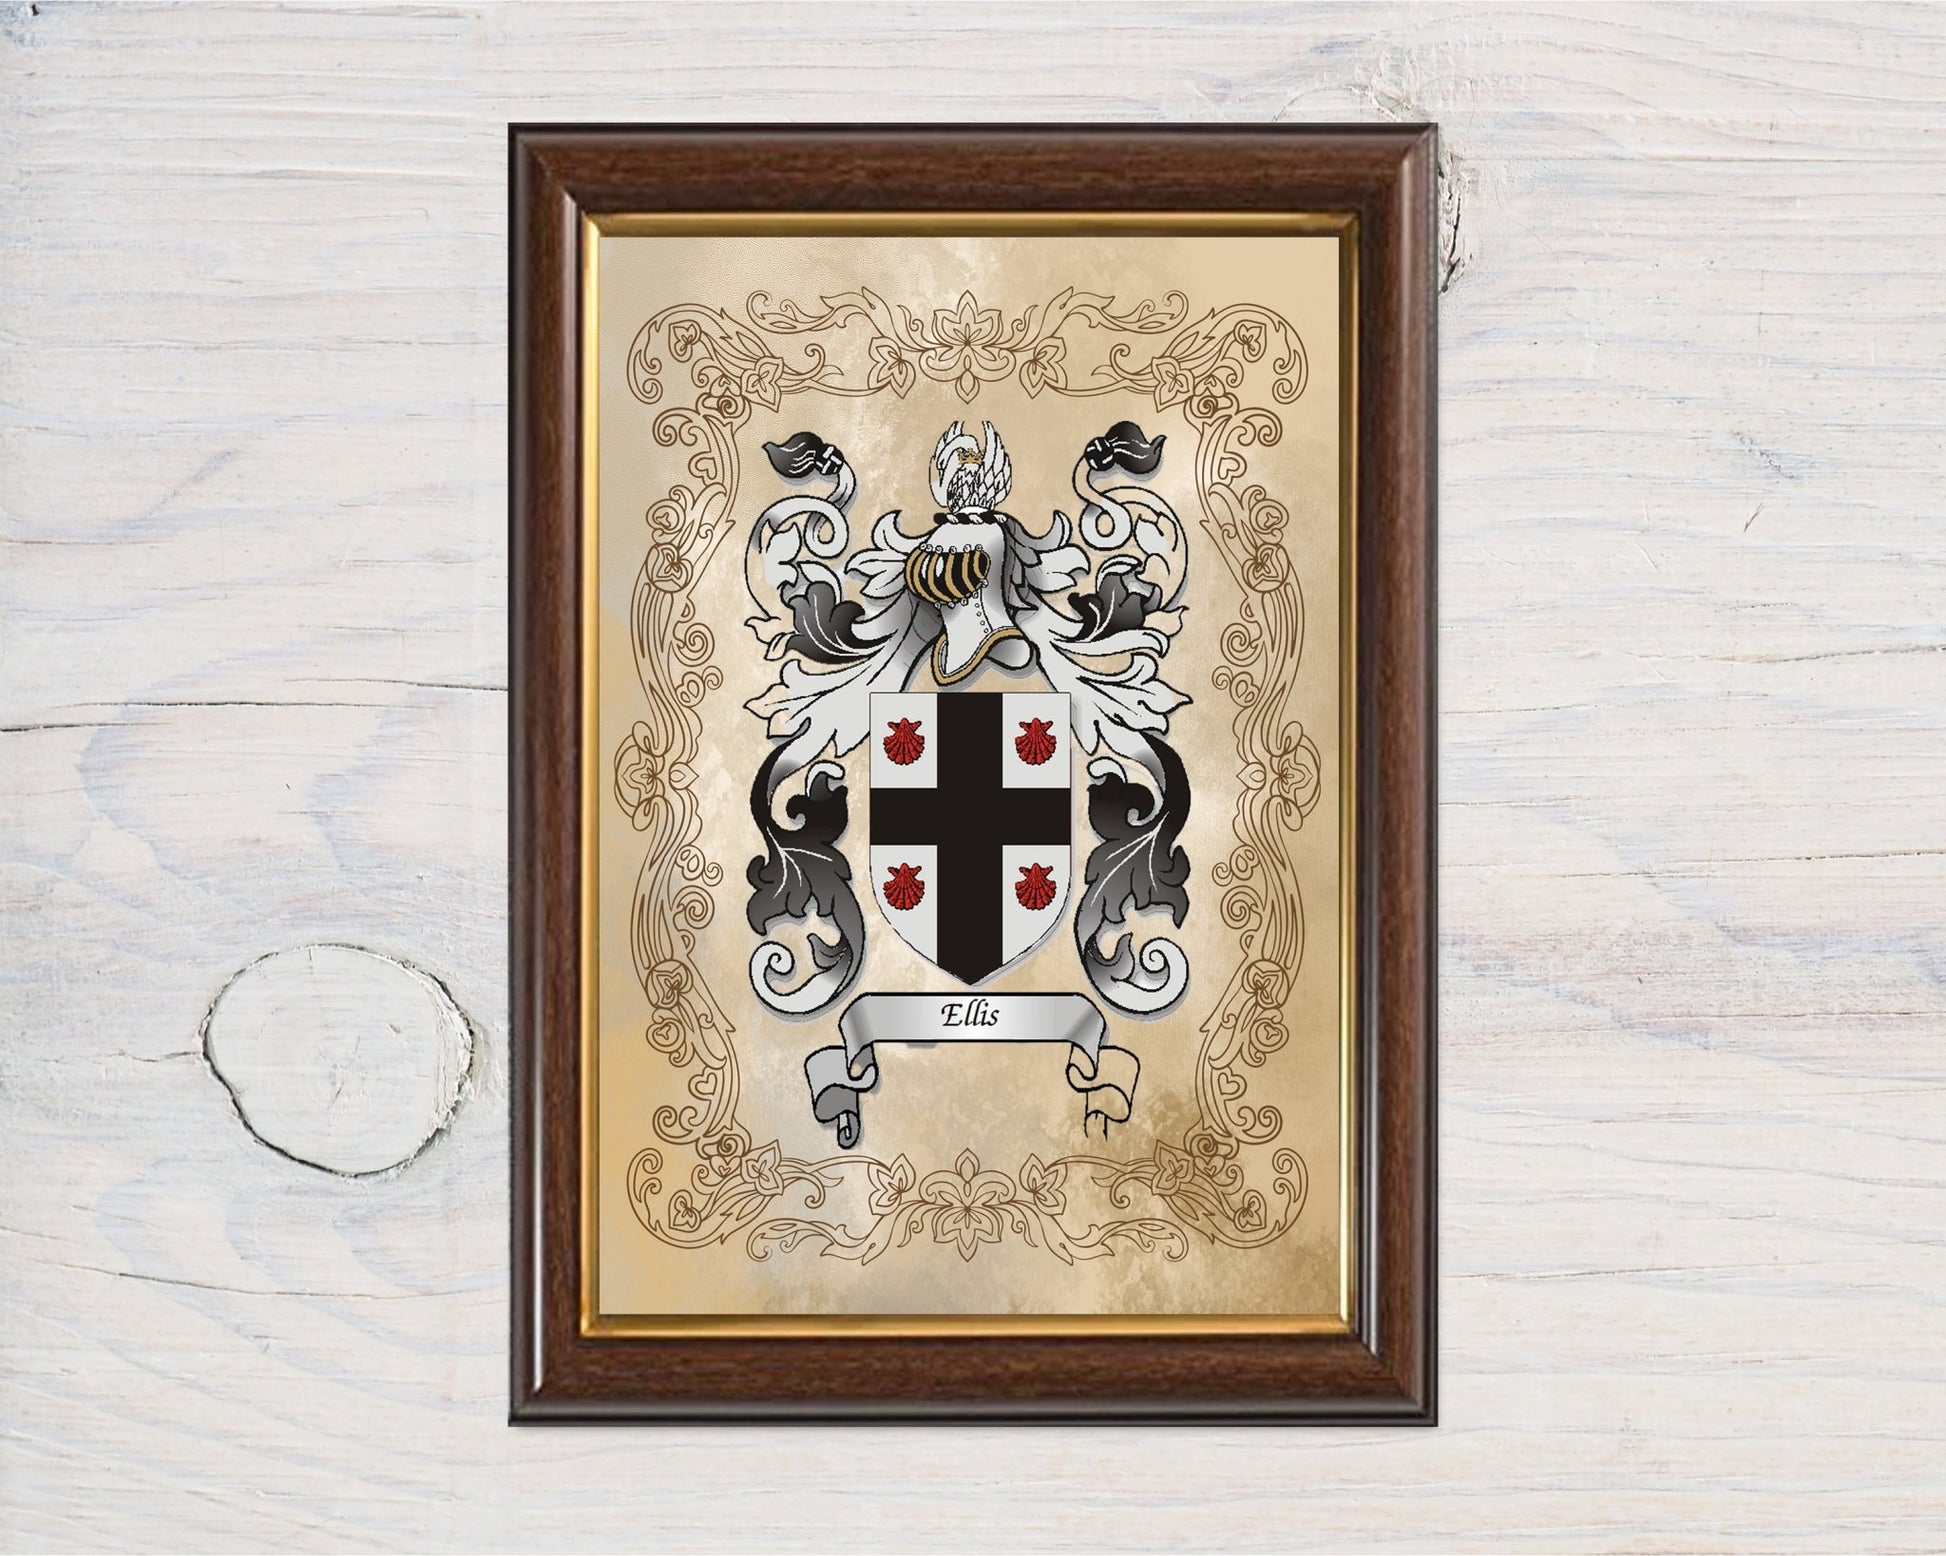 Framed A4 Heraldry/Genealogy/Family Crest/Family Name/Coat of Arms/Surname A4 Wall Print - Rainbowprint.uk